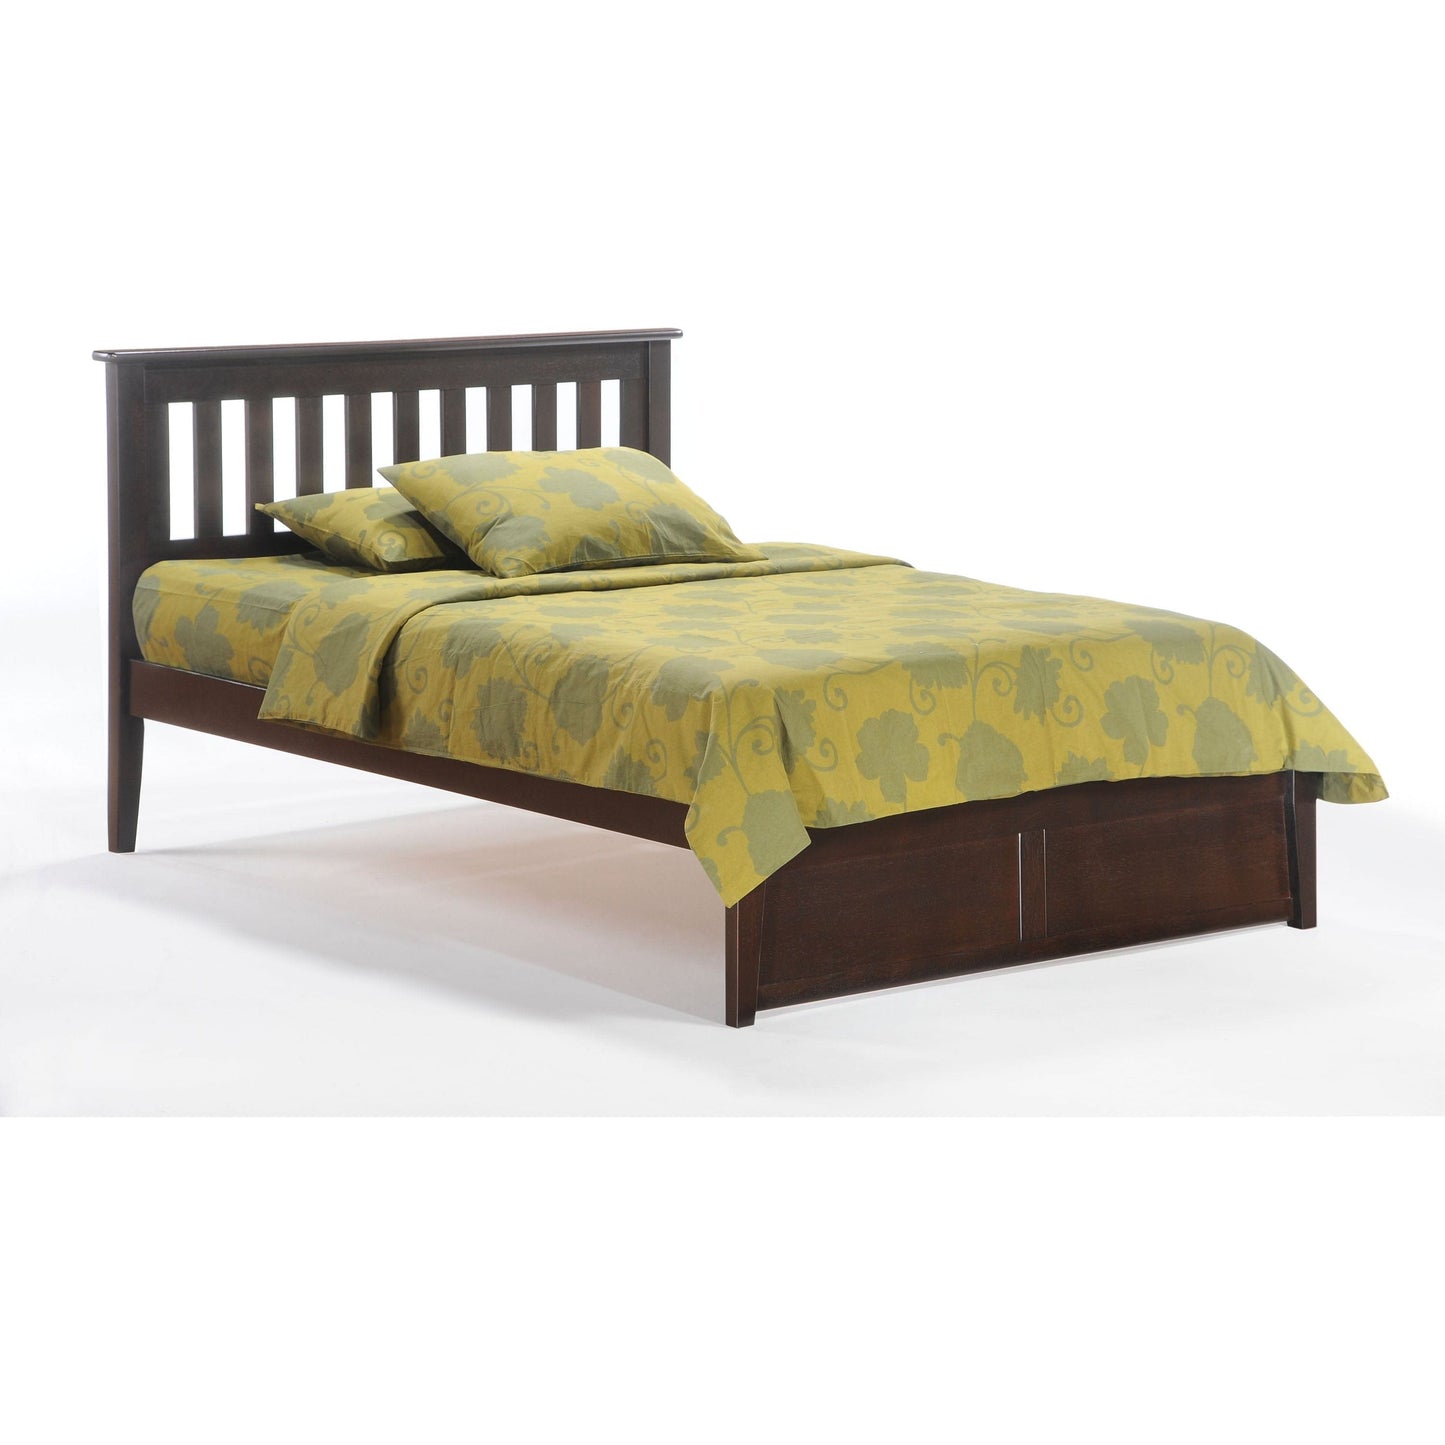 Night And Day King Rosemary Bed (P Series) in chocolate finish RMY-PH-EKG-CHO-COM